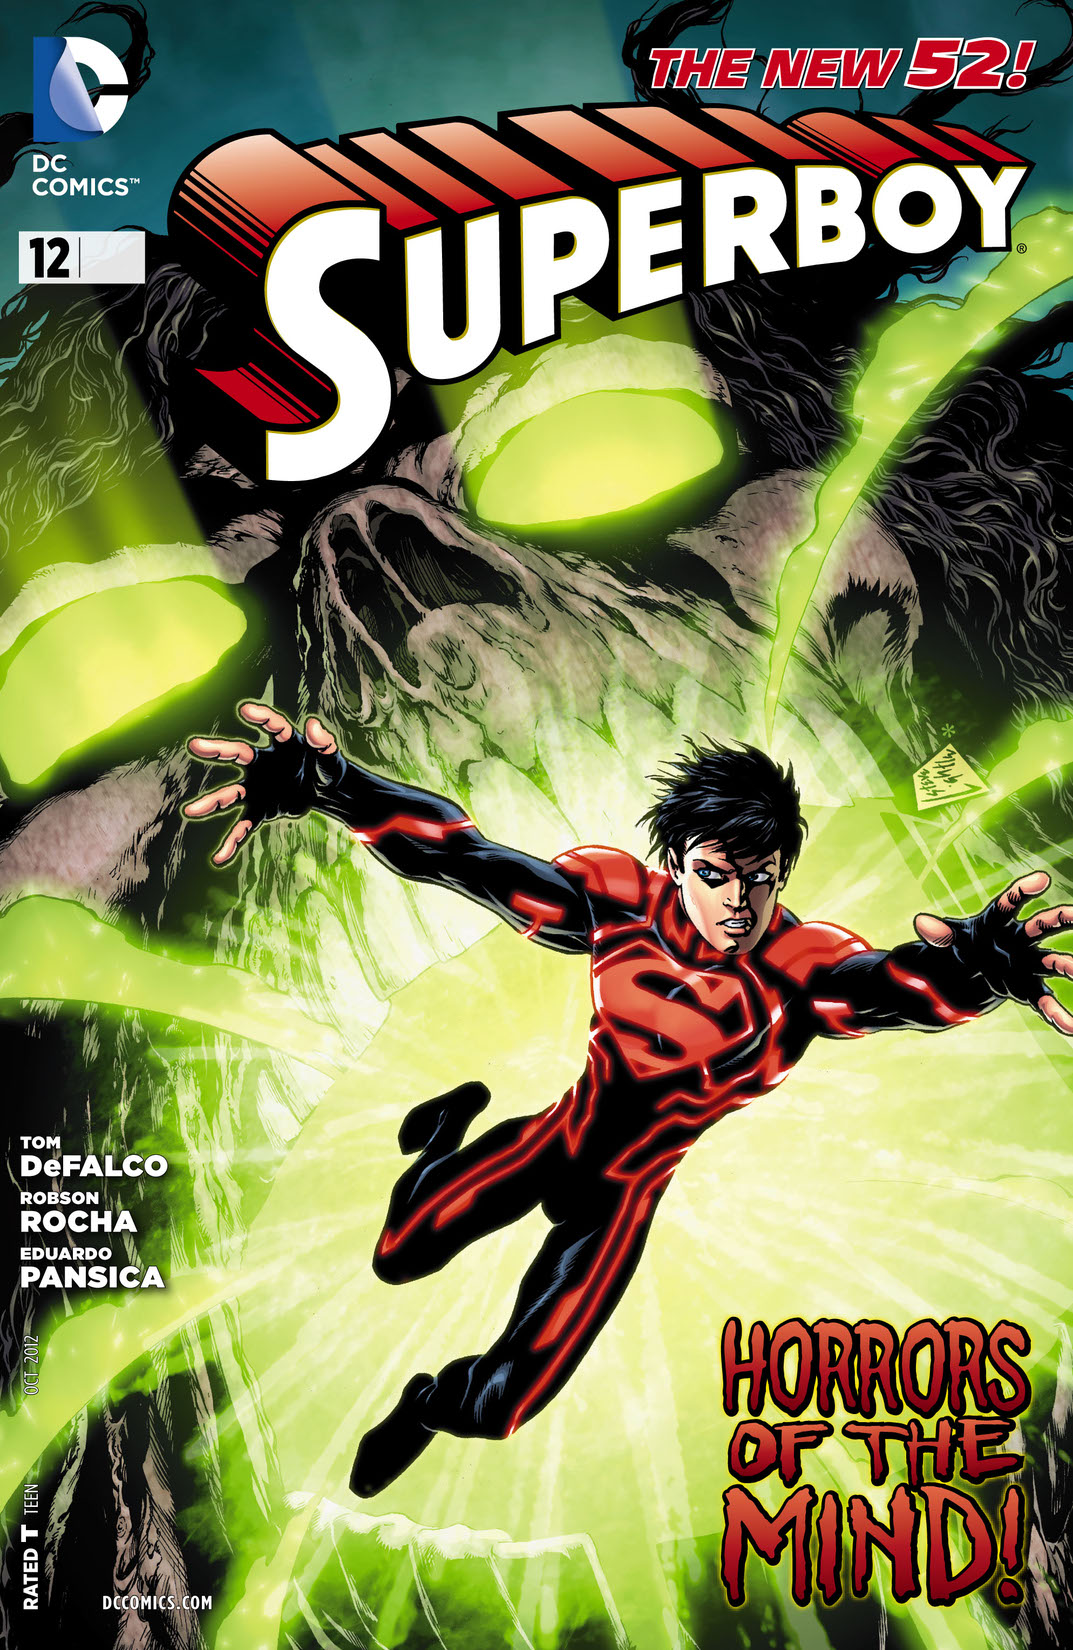 Superboy (2011-) #12 preview images